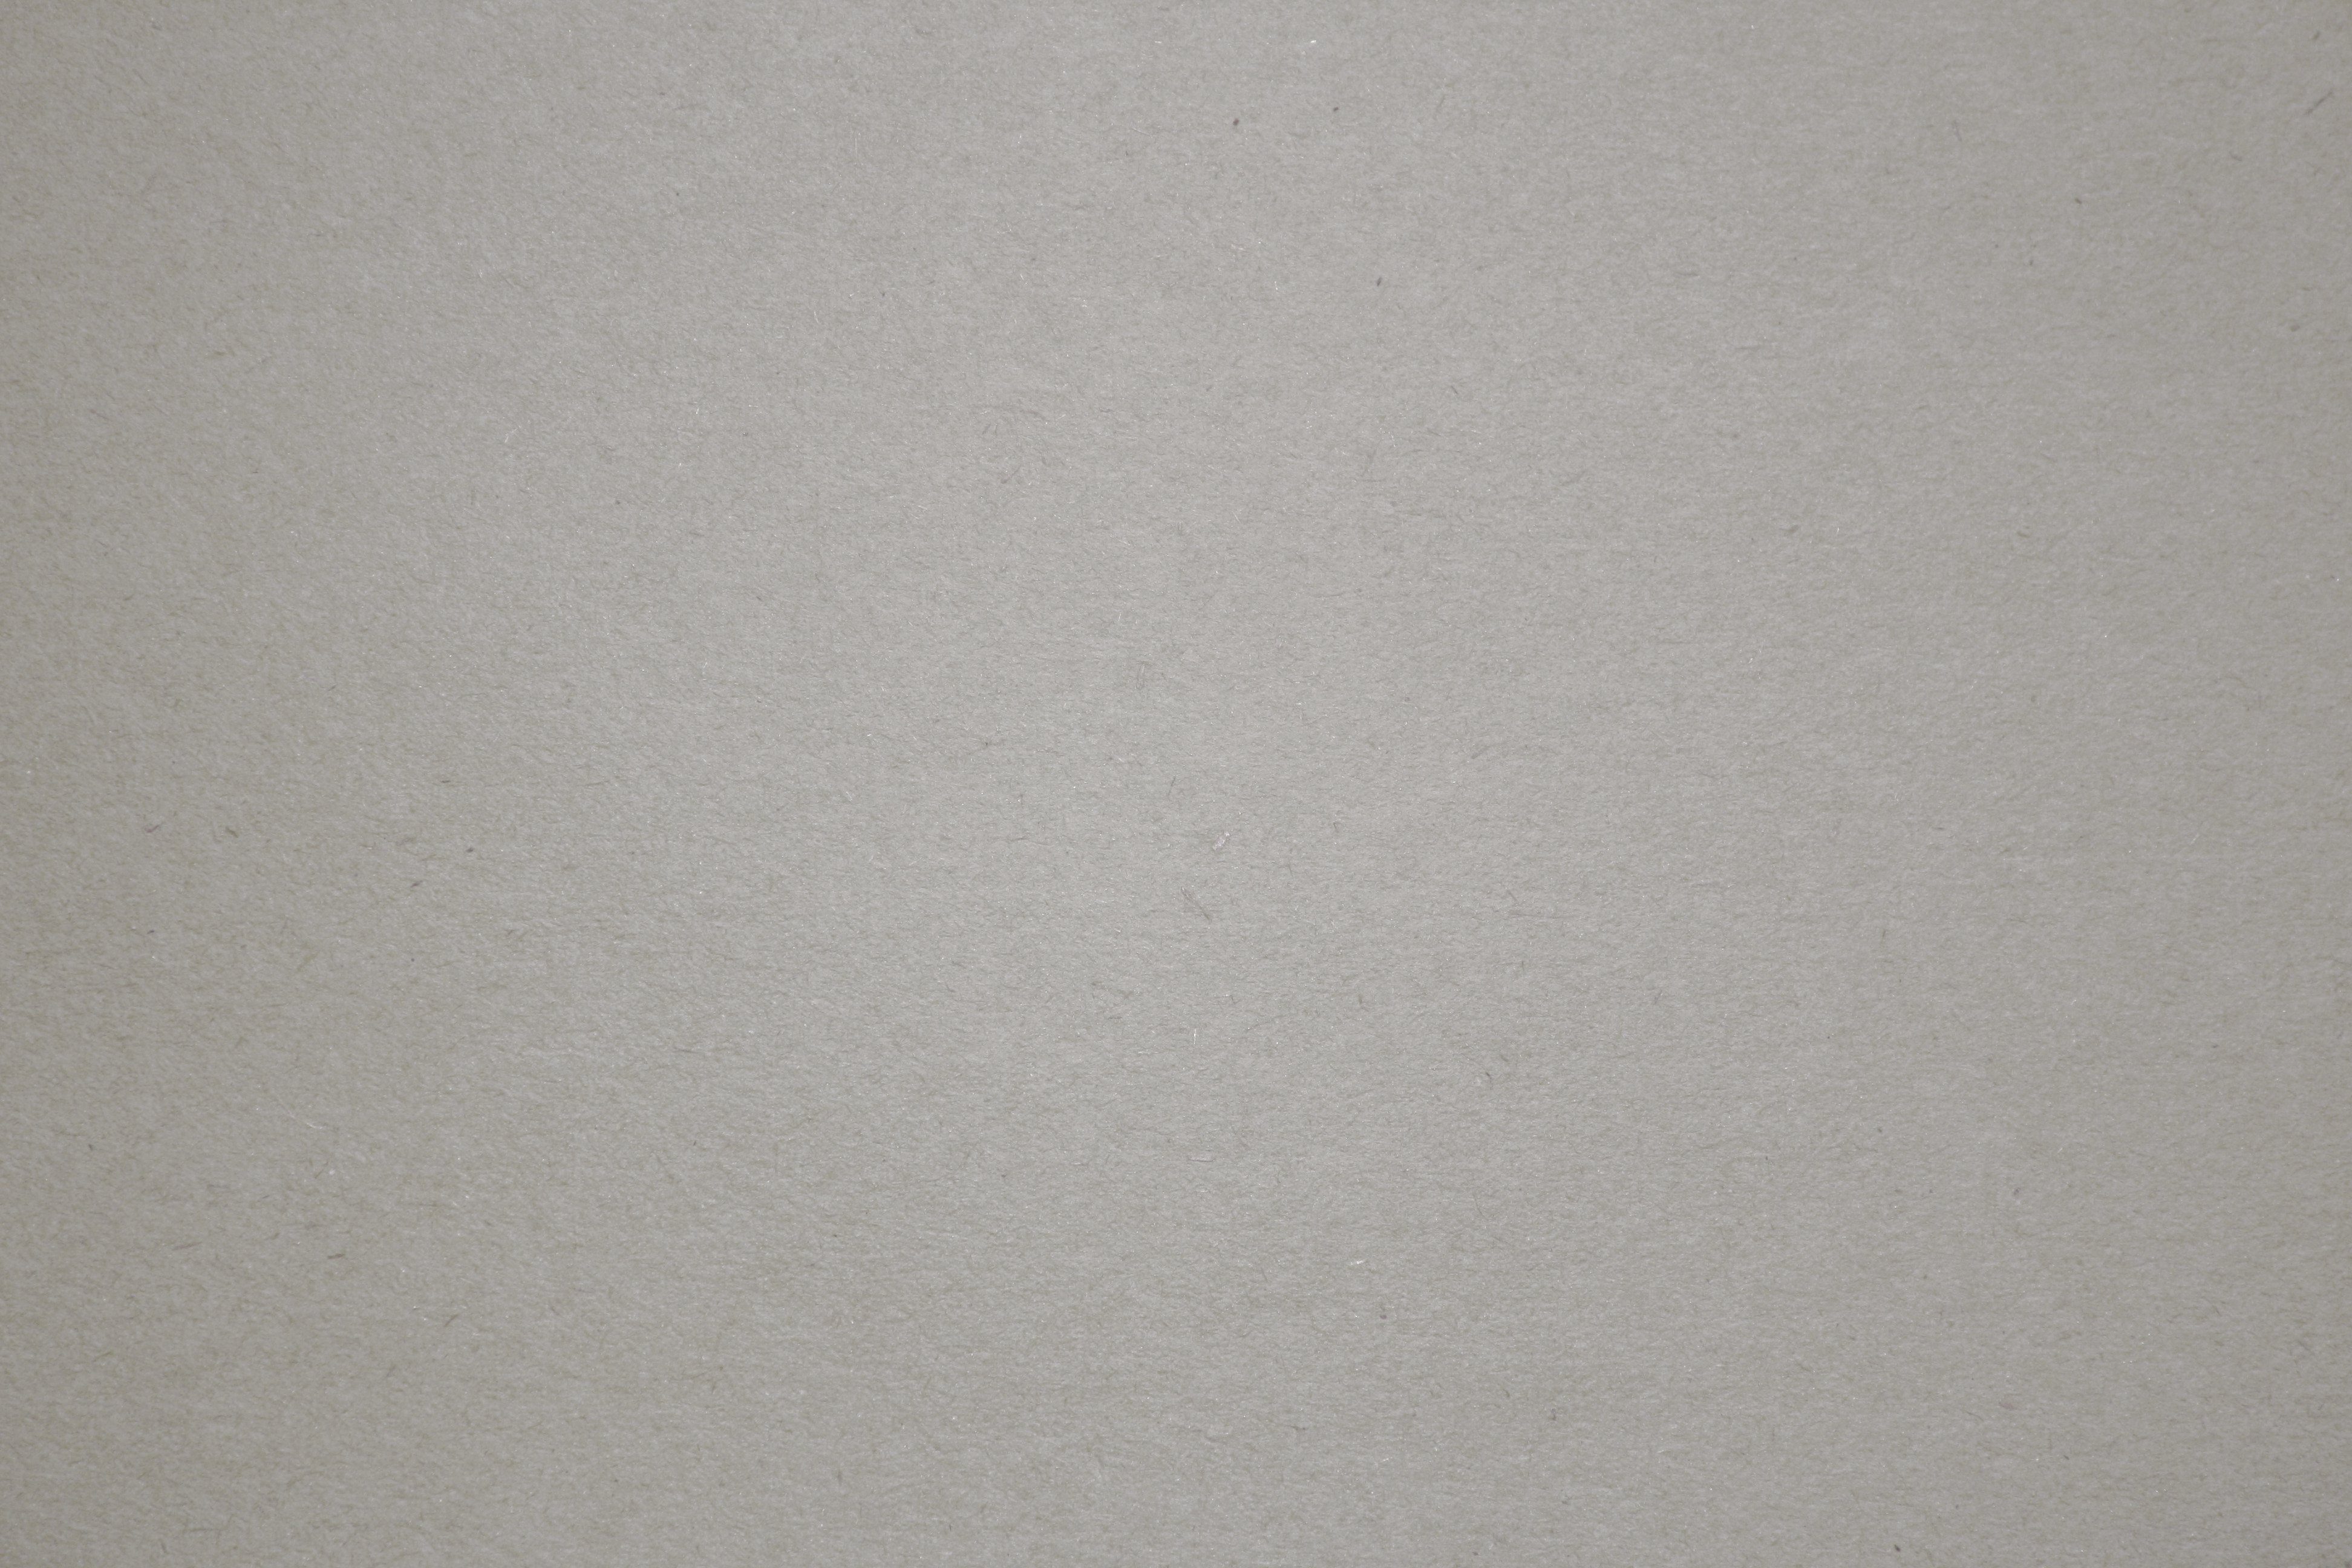 Gray Construction Paper Texture Picture | Free Photograph | Photos ...